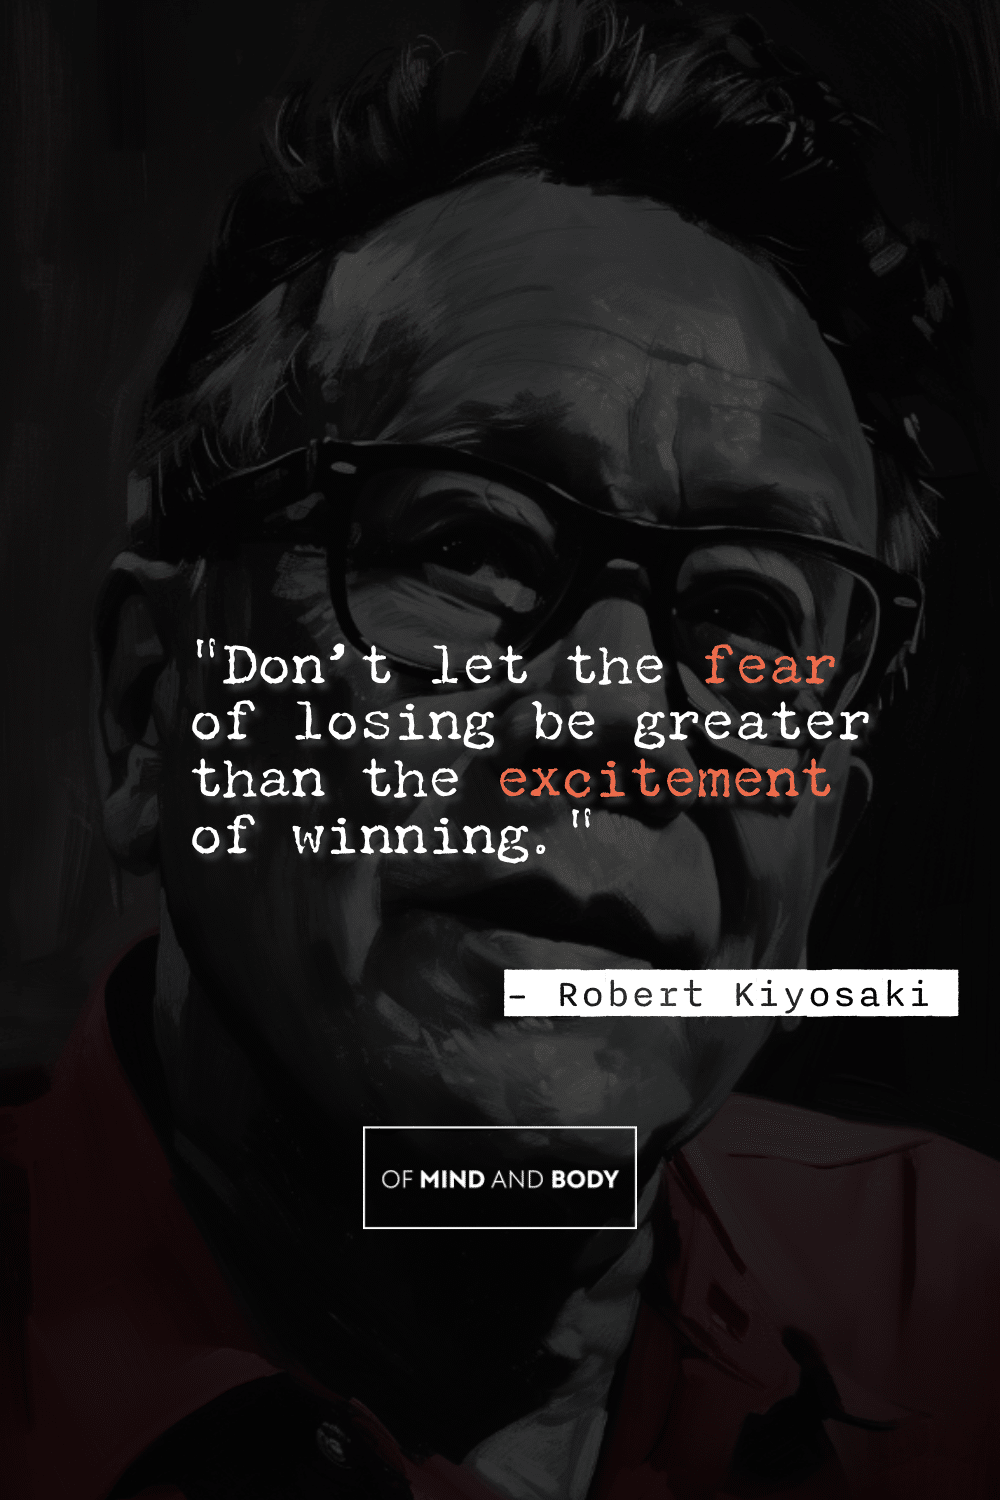 Quotes on Self Improvement - "Don’t let the fear of losing be greater than the excitement of winning."